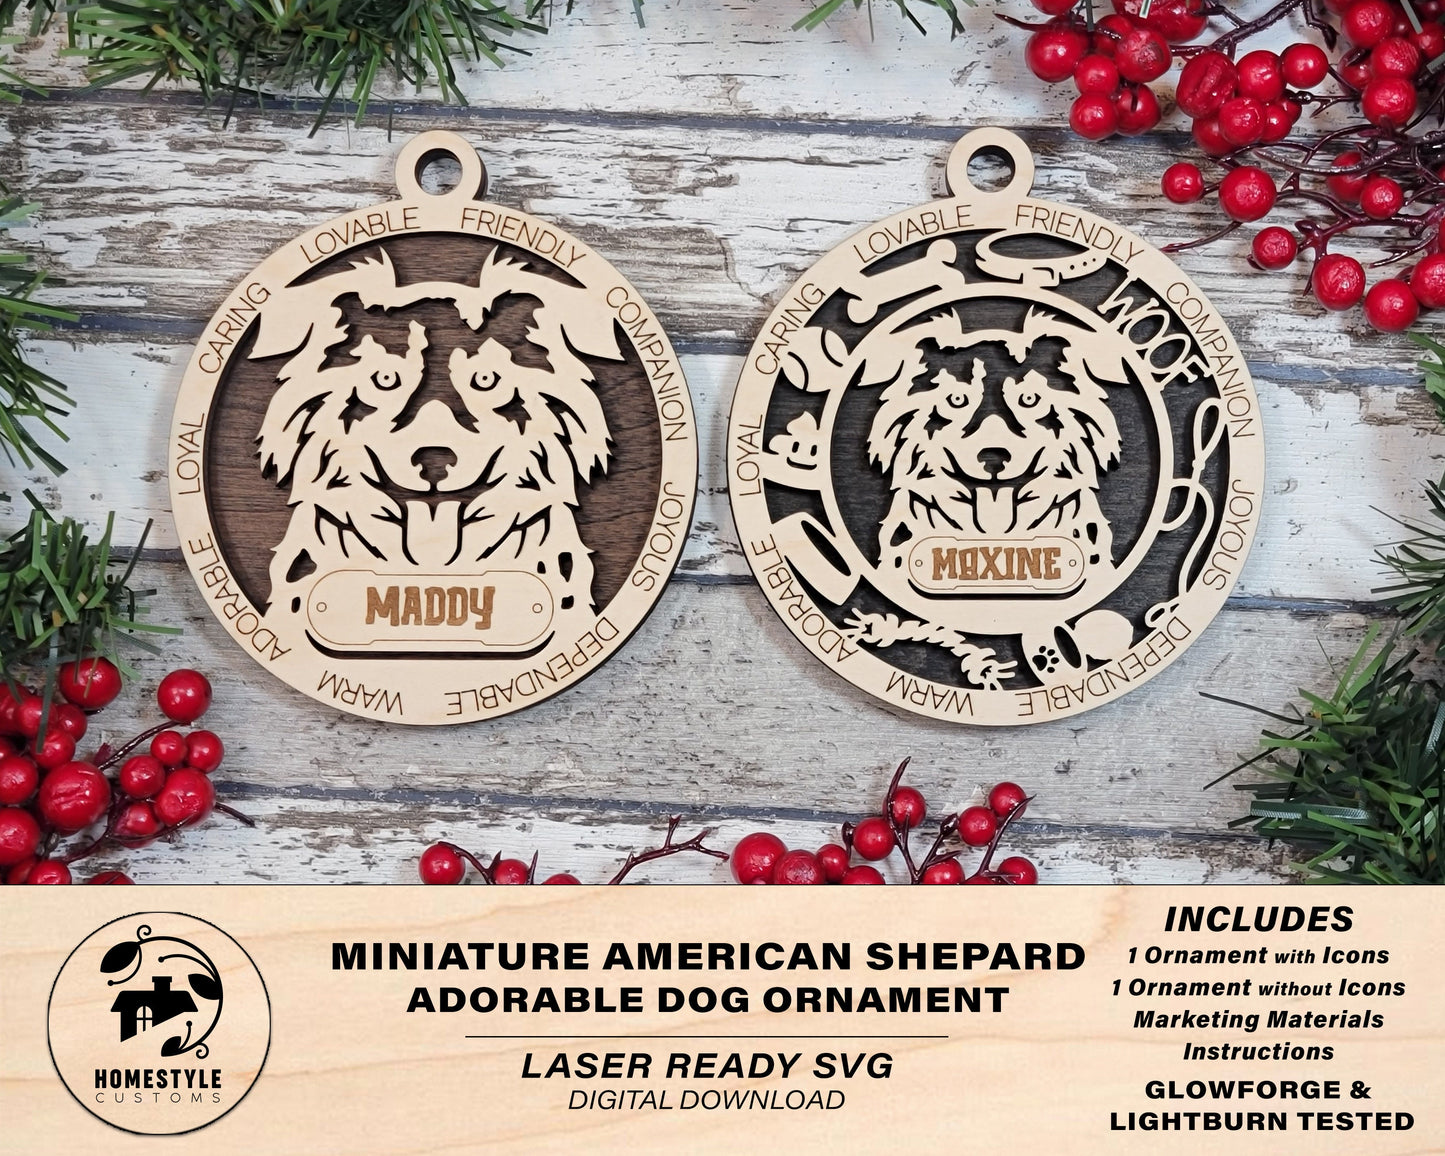 Miniature American Shepherd - Adorable Dog Ornaments - 2 Ornaments included - SVG, PDF, AI File Download - Sized for Glowforge